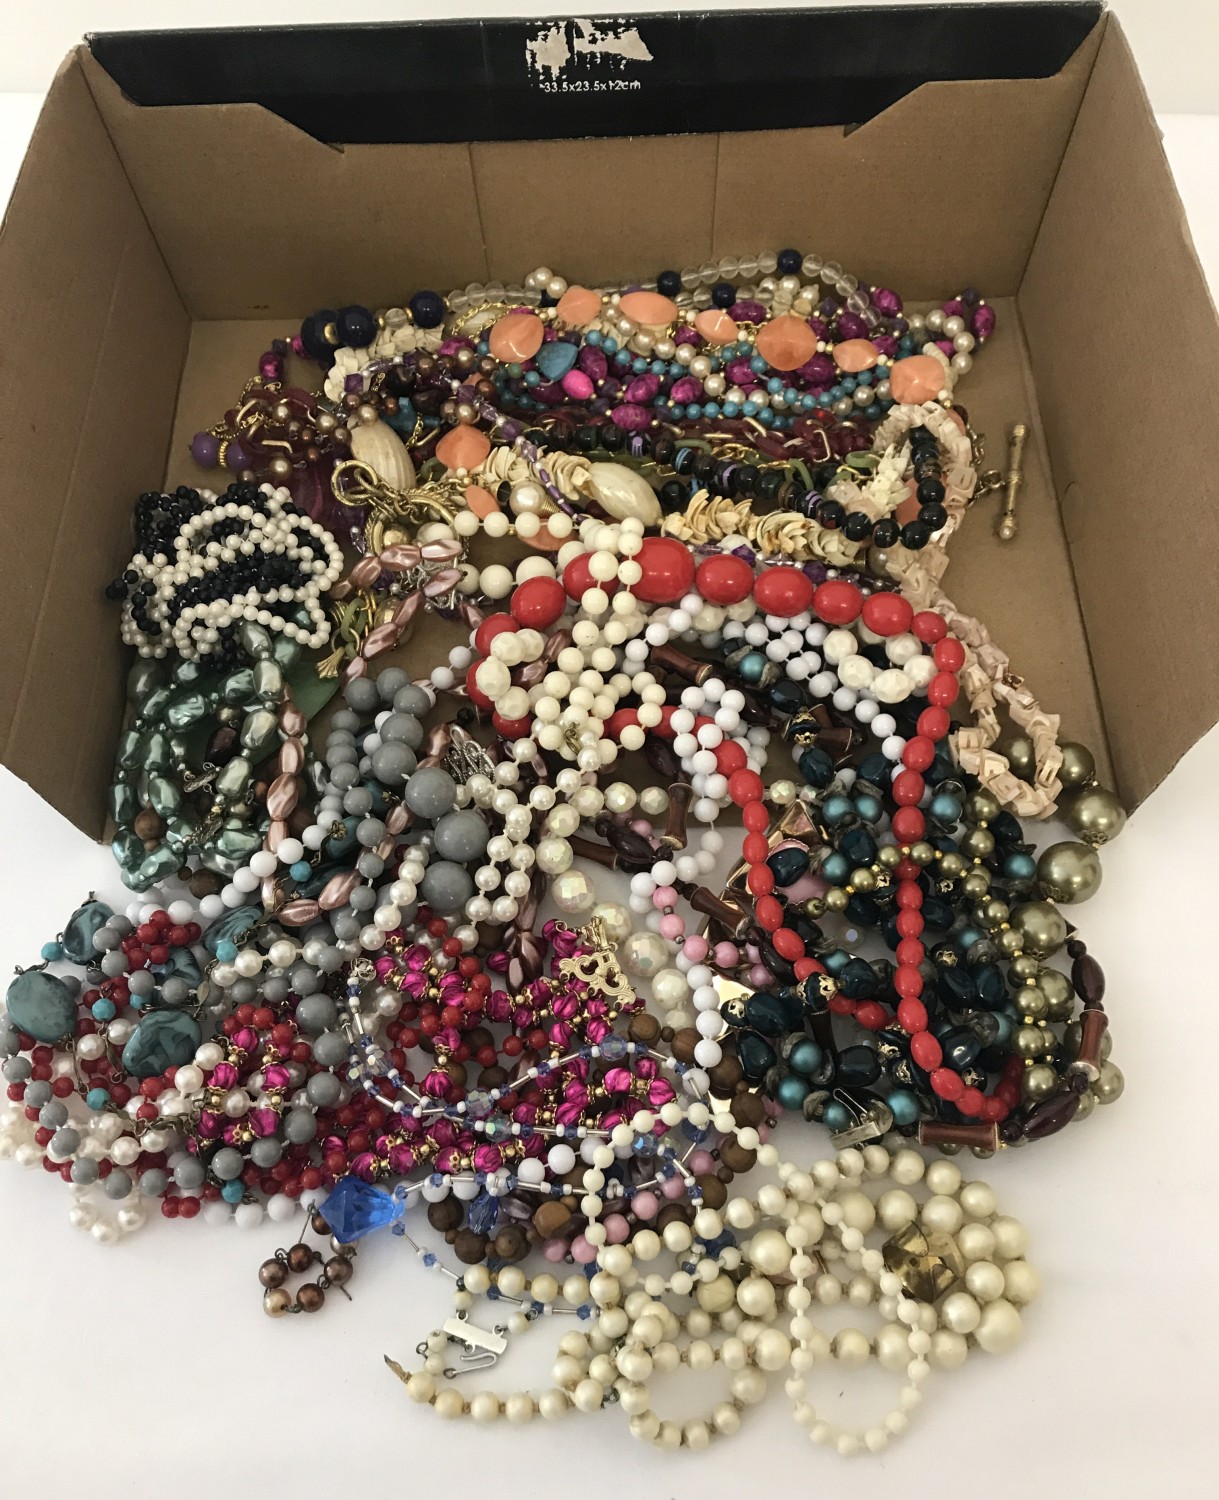 A box of vintage plastic and wooden bead necklaces.